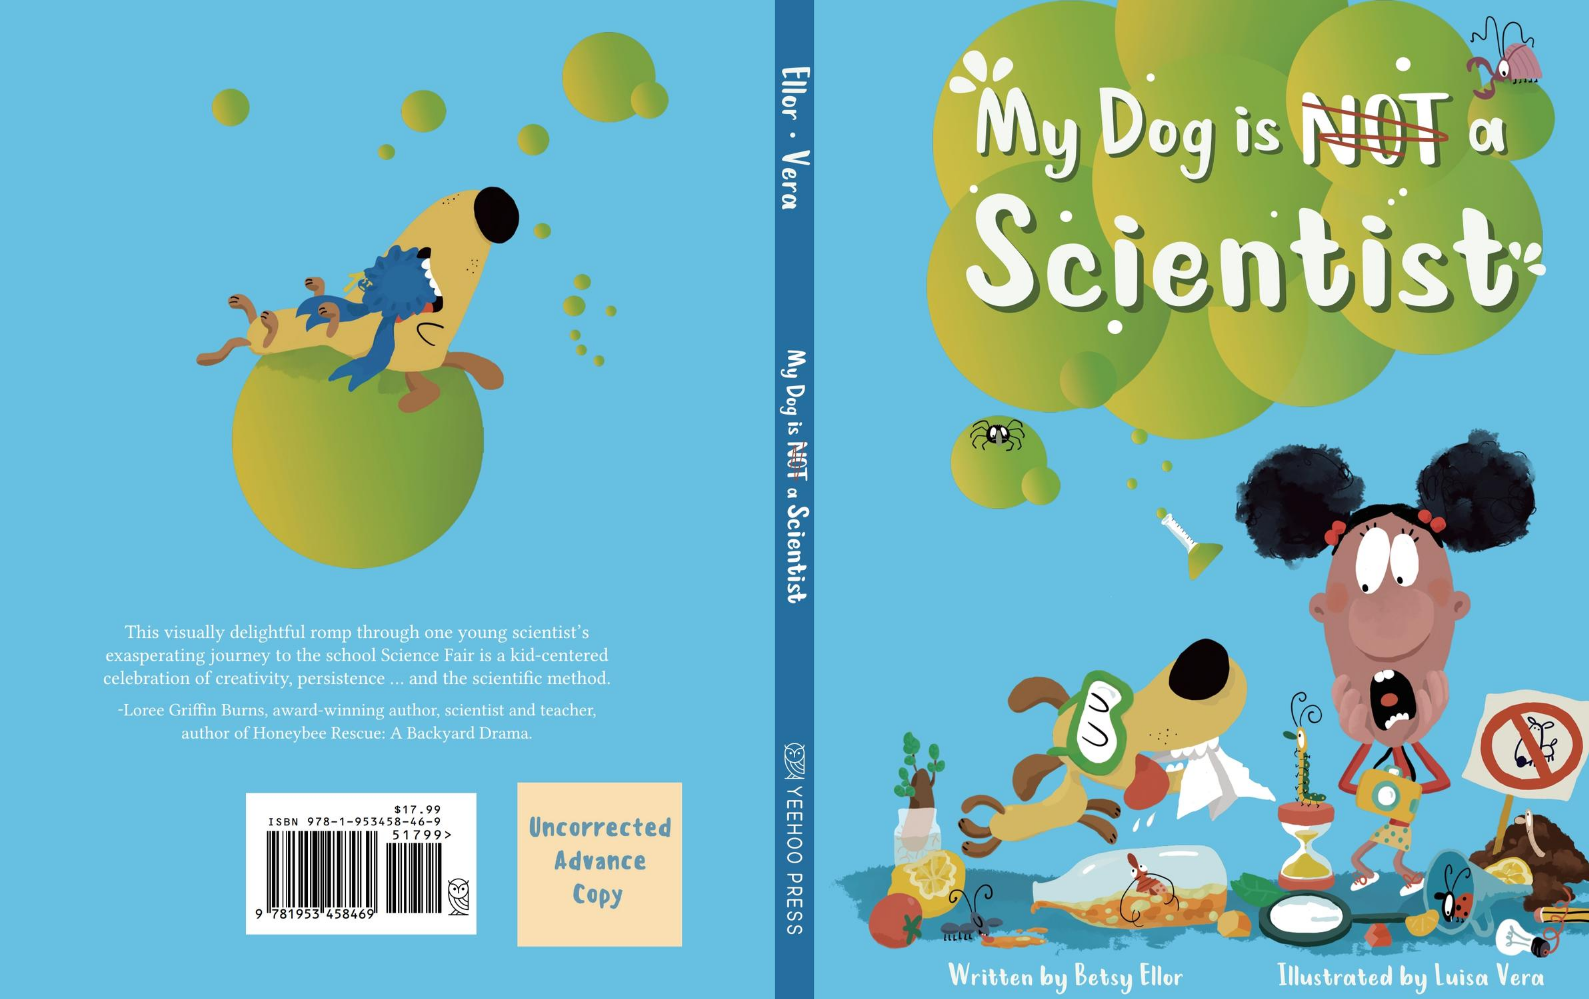 My Dog is Not a Scientist